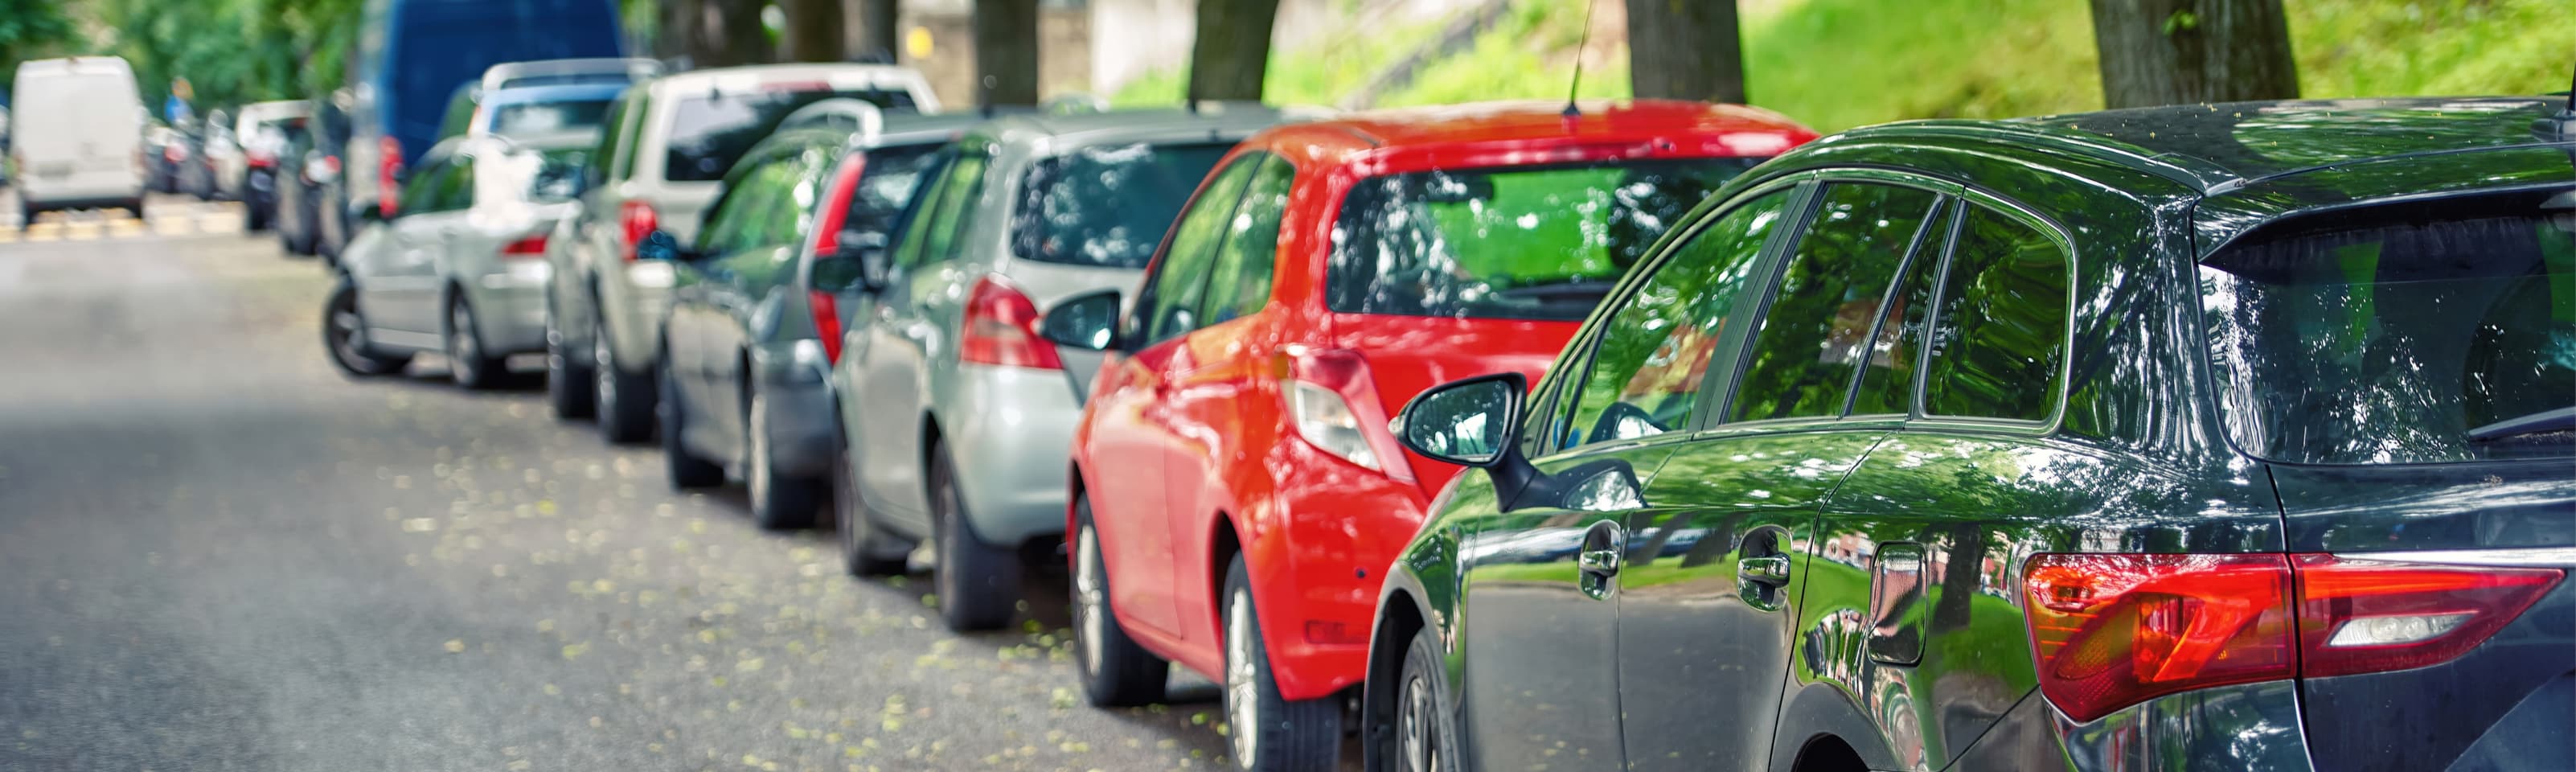 Our top tips to getting roadside parking right